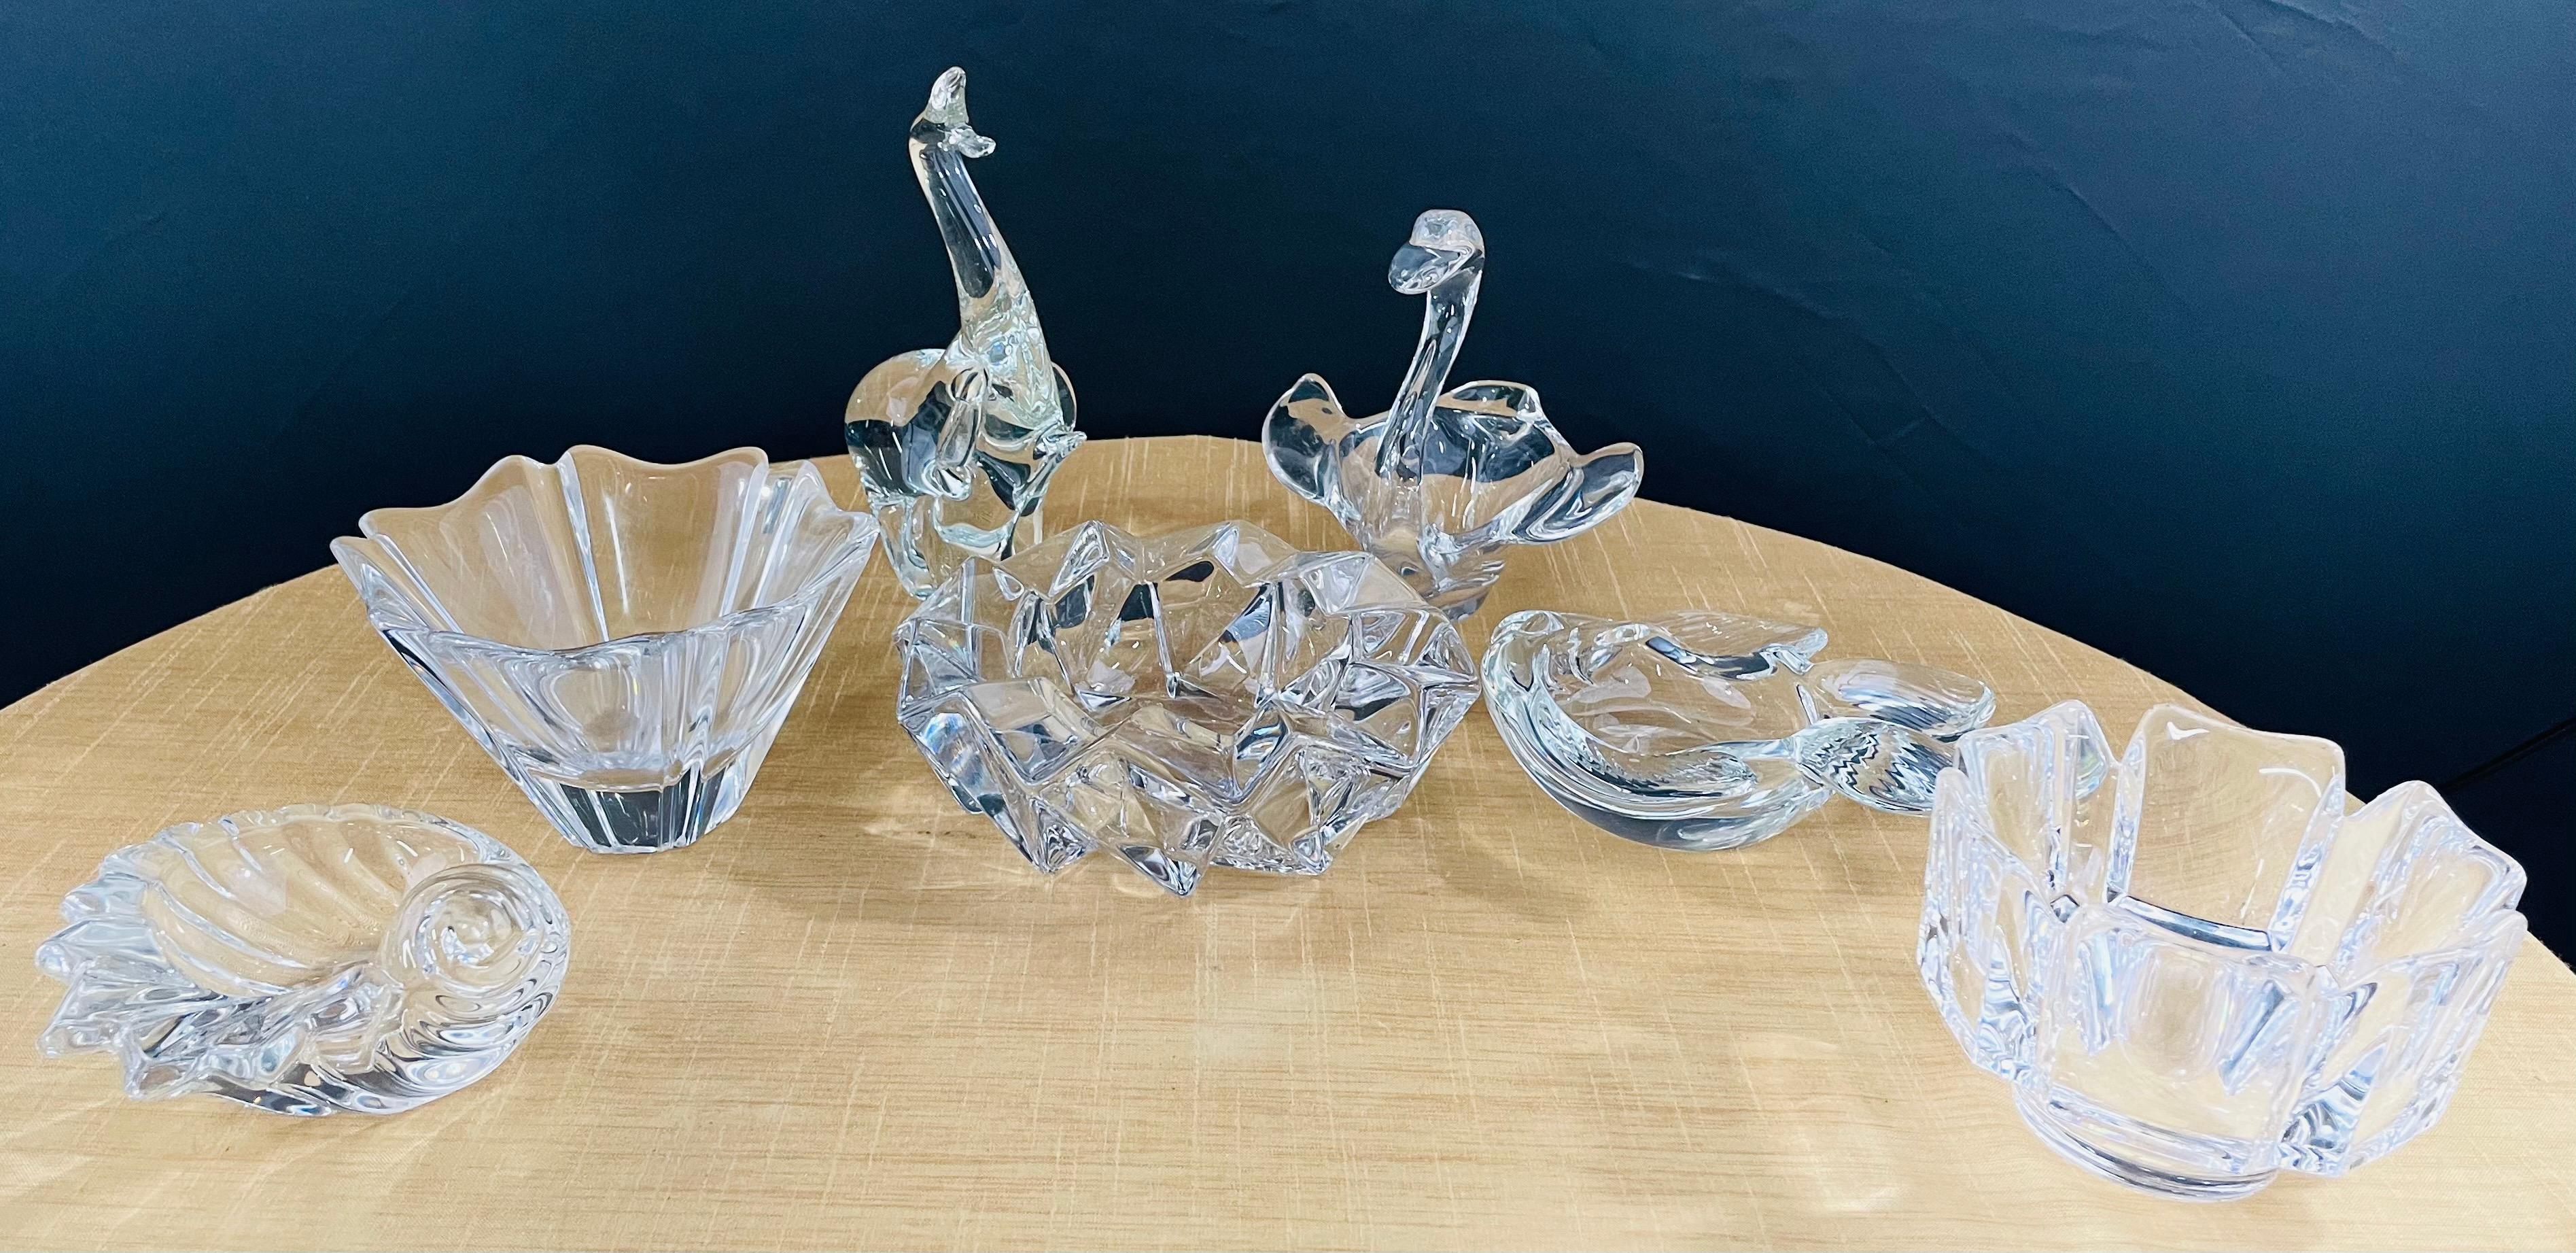 A set of 7 crystal small dishes, that can also be used as ashtrays. Each differs in shape and some pieces are shaped as animals and sea species. The set of crystals can be used to store items if needed while decorate your desk or shelves.